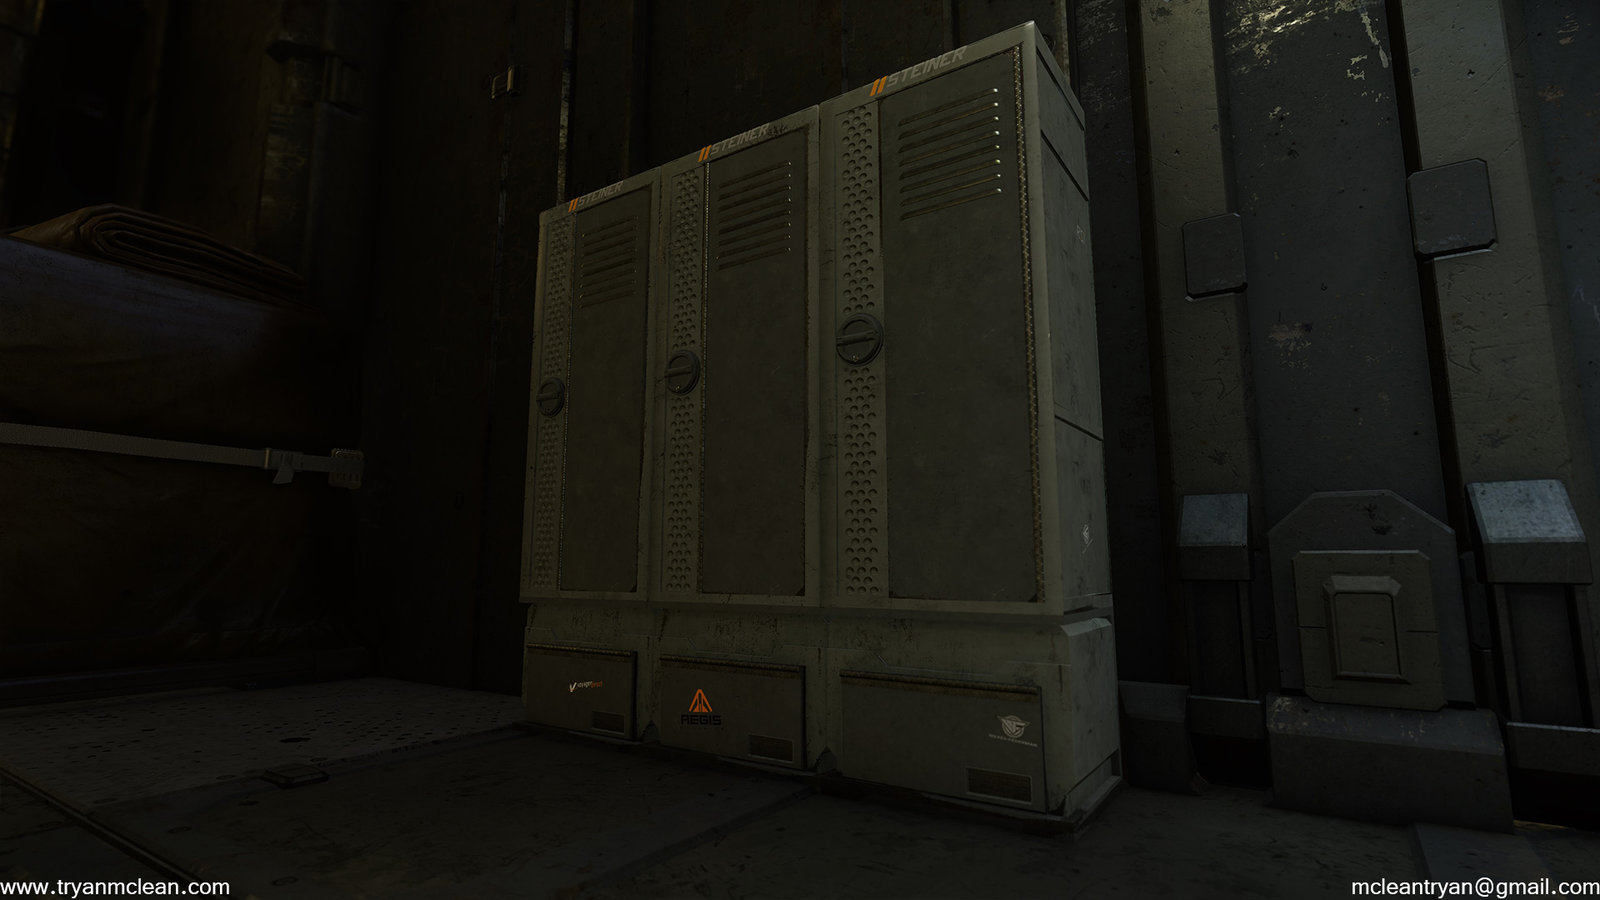 Star Citizen Subscriber Flair Locker. Modelling by myself. Textures and blending done by others on team. 